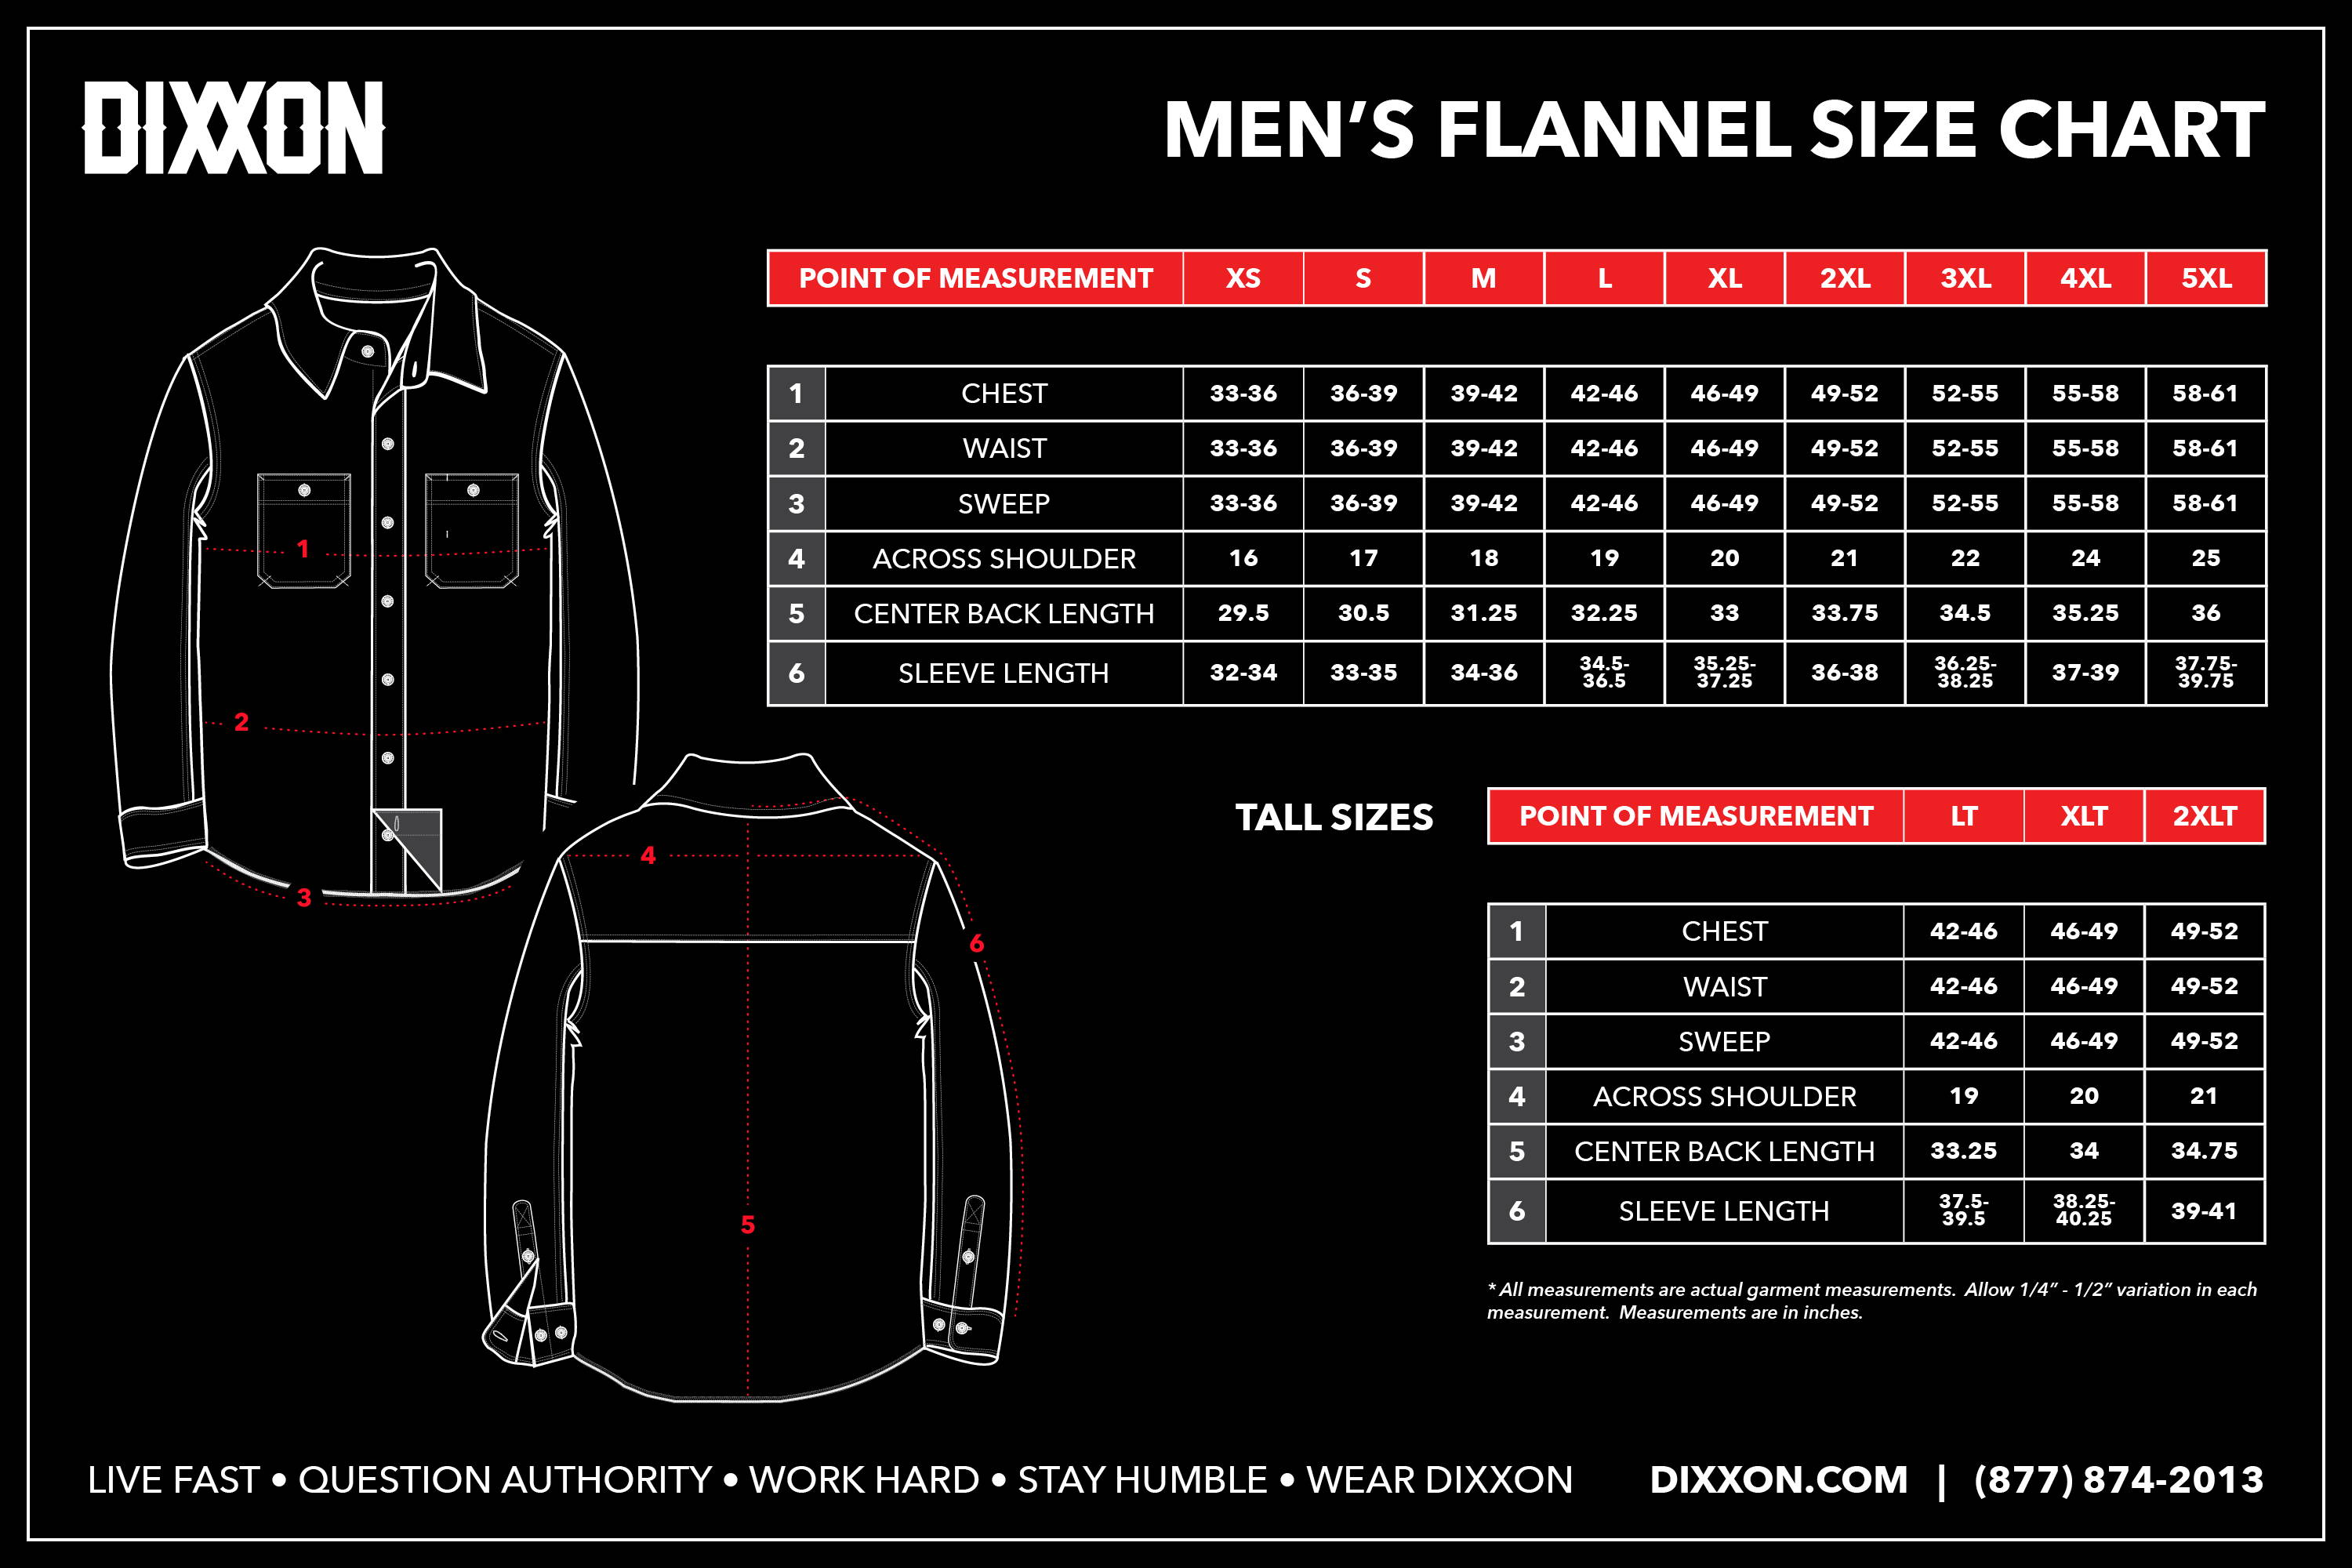 This size chart includes measurements for men's flannels, short sleeve bamboo shirts, and short sleeve party shirts.